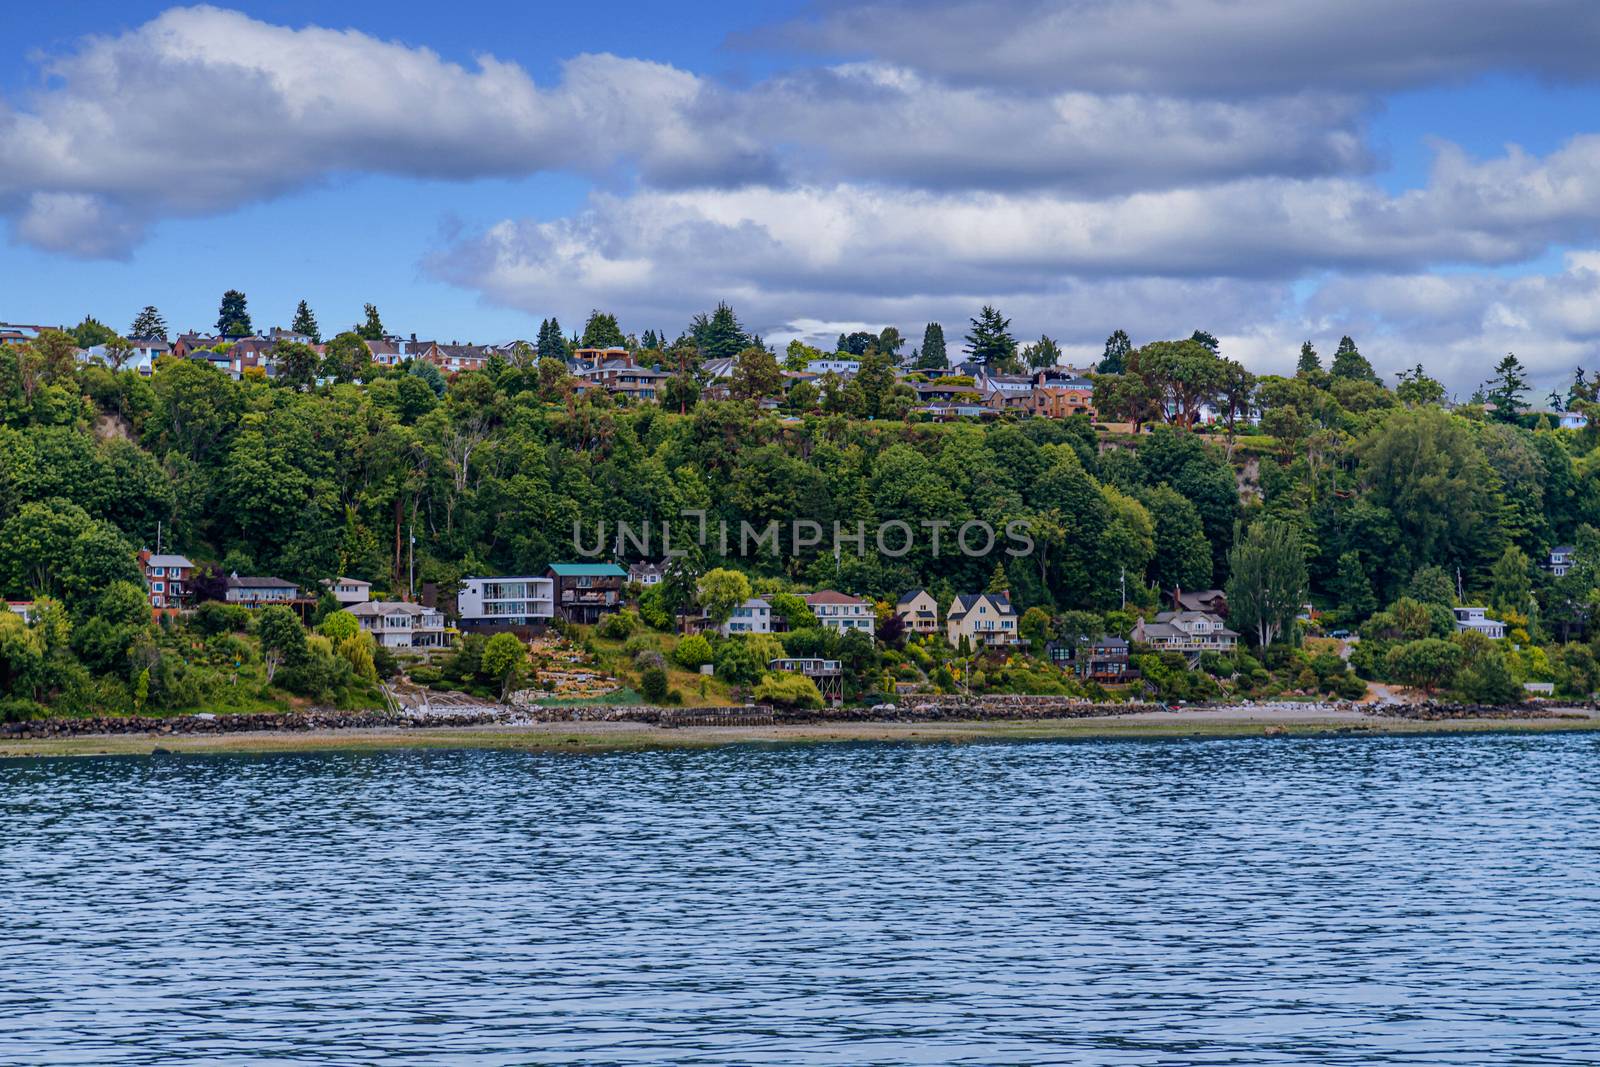 Many Colorful Homes on Puget Sound near Seattle